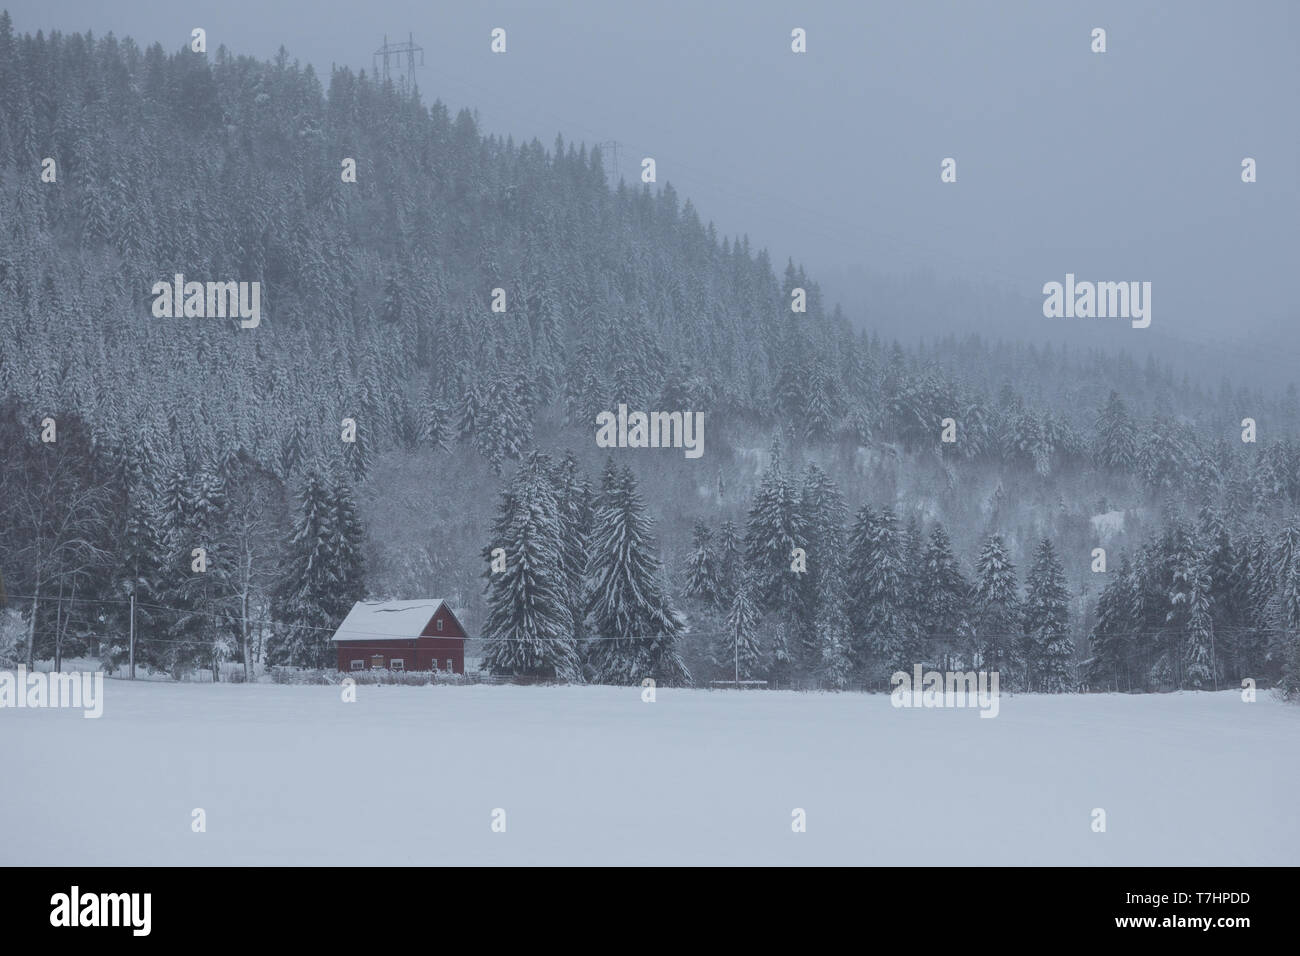 Wooden houses in the forest area near Ranheim, Norway. Wintertime and first snow falls. Stock Photo